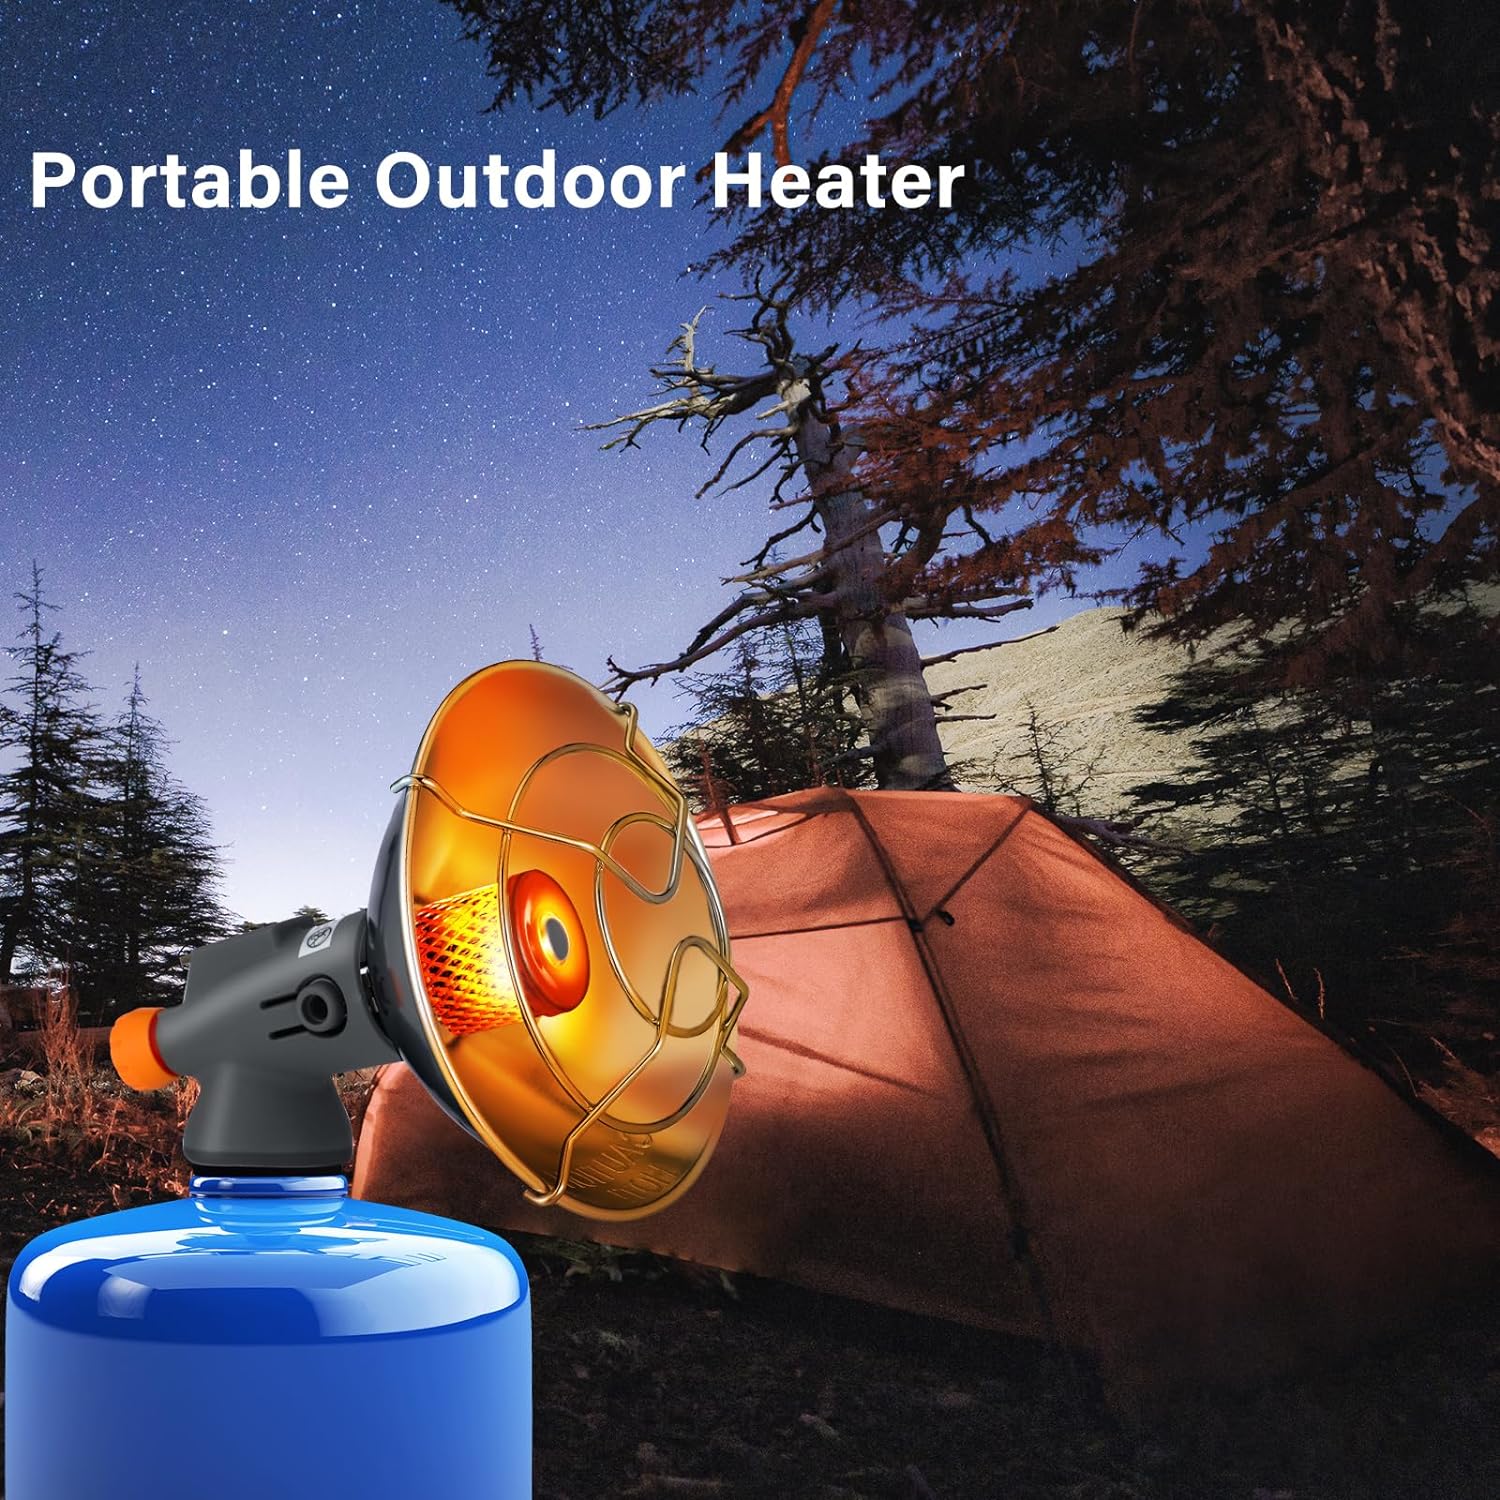 VIHOSE 2 Sets Camping Gas Heater Rapid Heating Energy Heater Portable Tent Heater with Storage Box Conversion Head and Bracket for Outdoor Hiking Fishing Mini Space Heater Stove - VIHOSE Camping Gas Heater Review